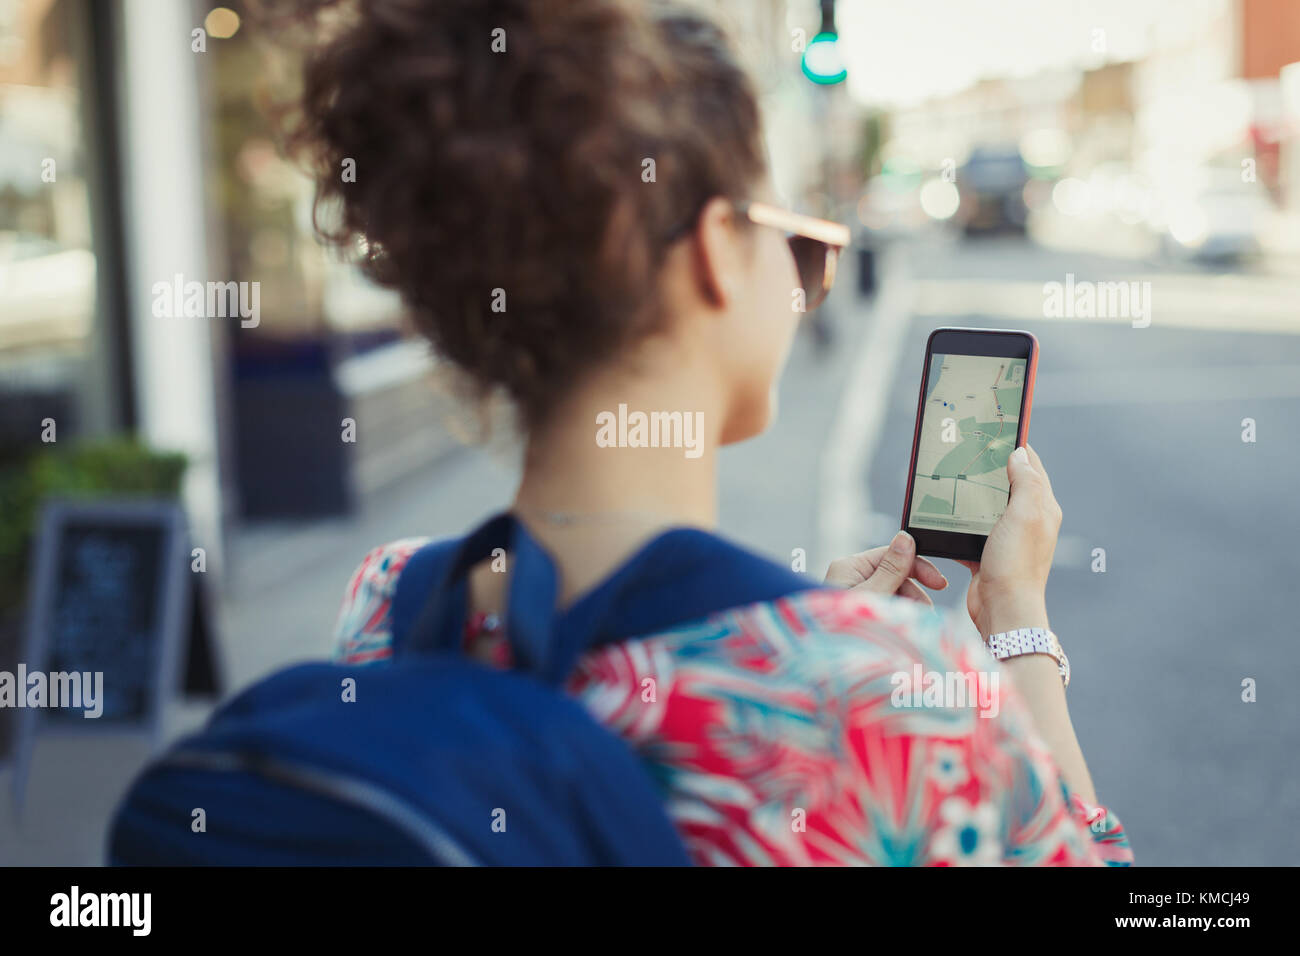 Young female tourist with backpack using GPS on smart phone on urban street Stock Photo